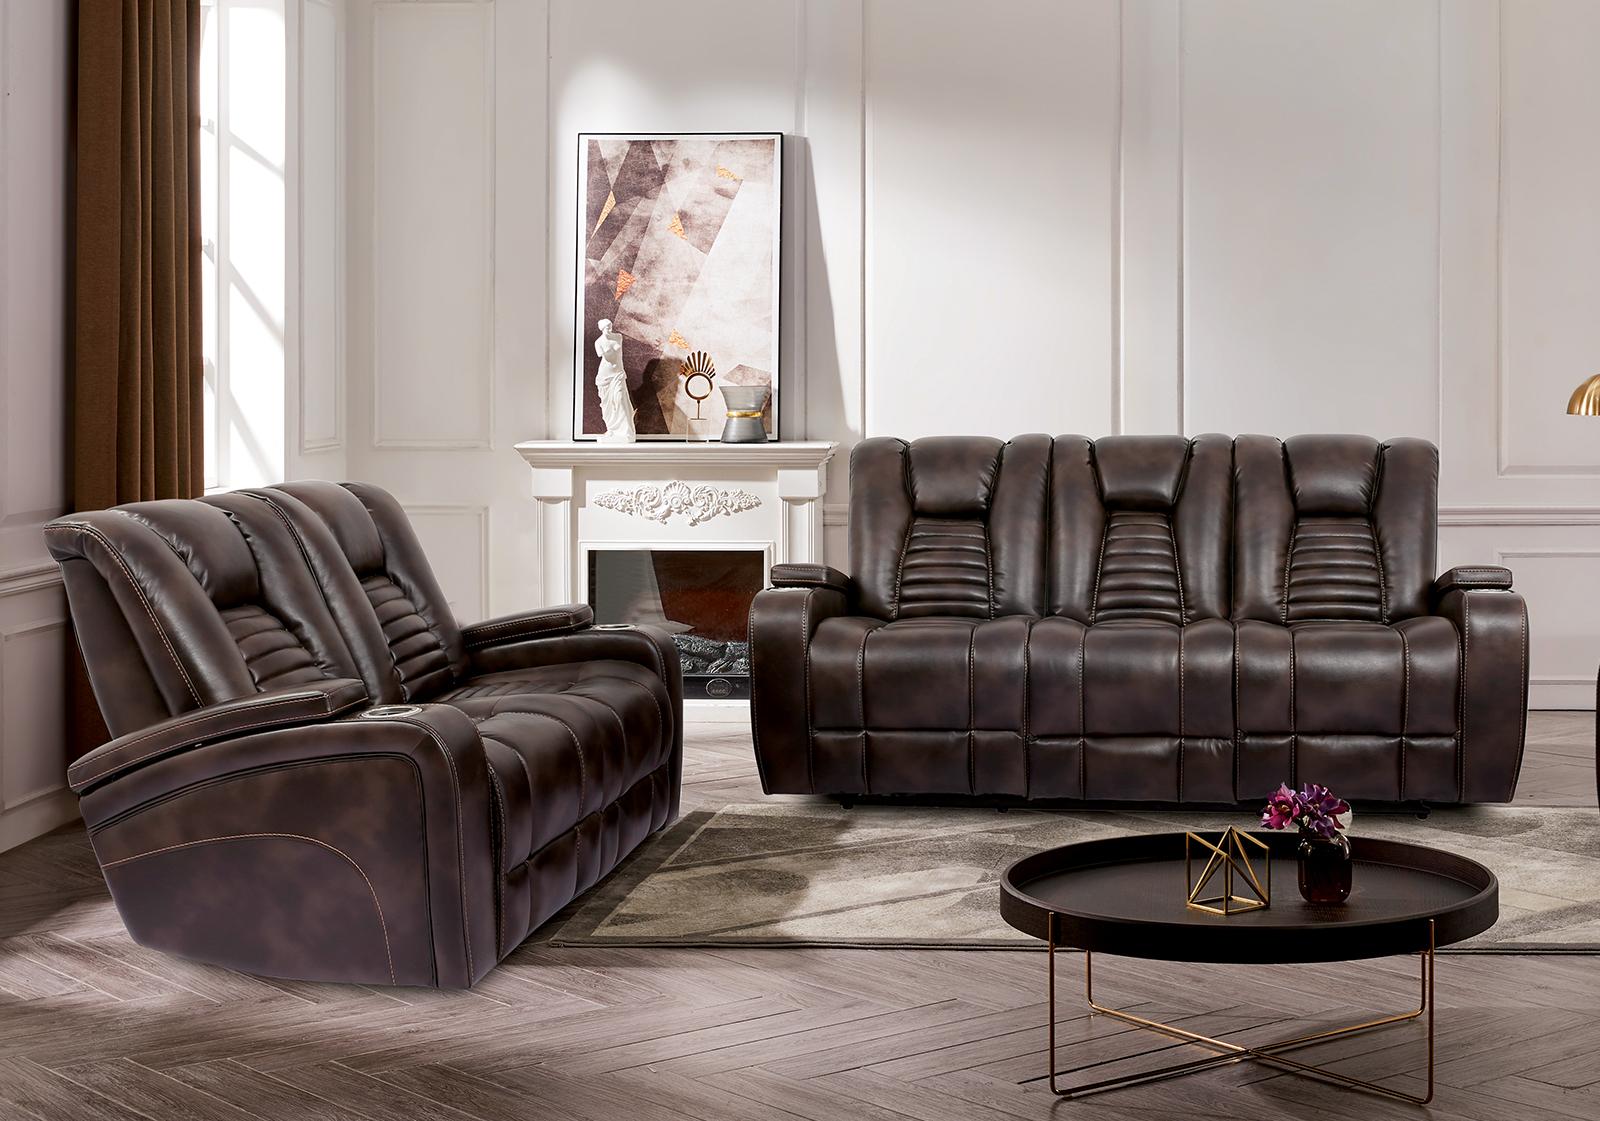 Transitional Power Reclining Living Room Set CM9902-SF Abrielle CM9902-SF-2PC in Dark Brown Faux Leather